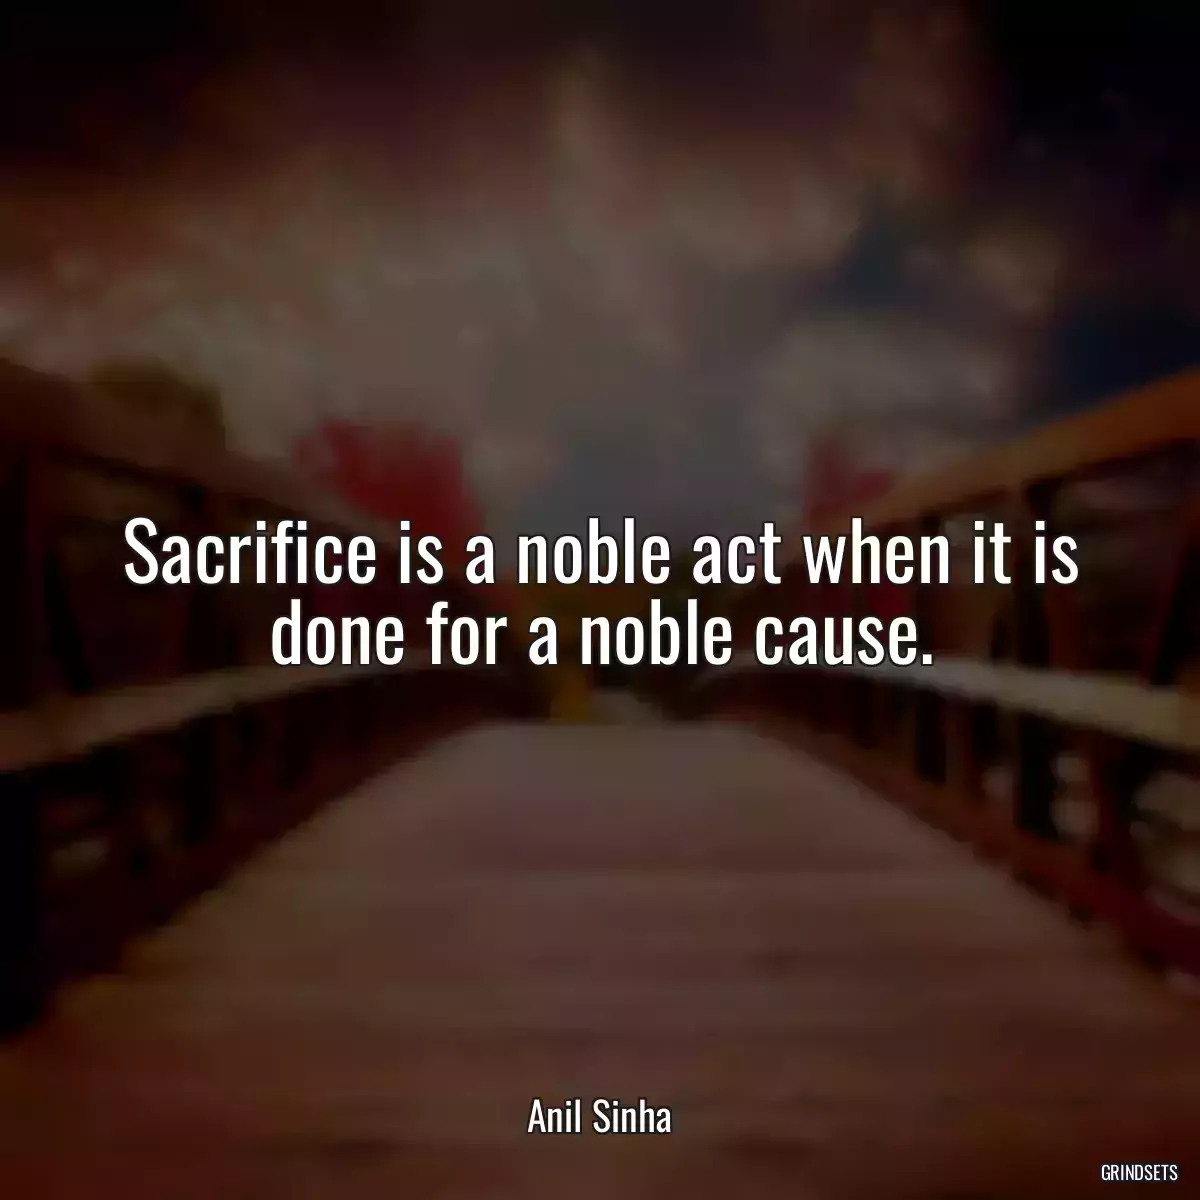 Sacrifice is a noble act when it is done for a noble cause.